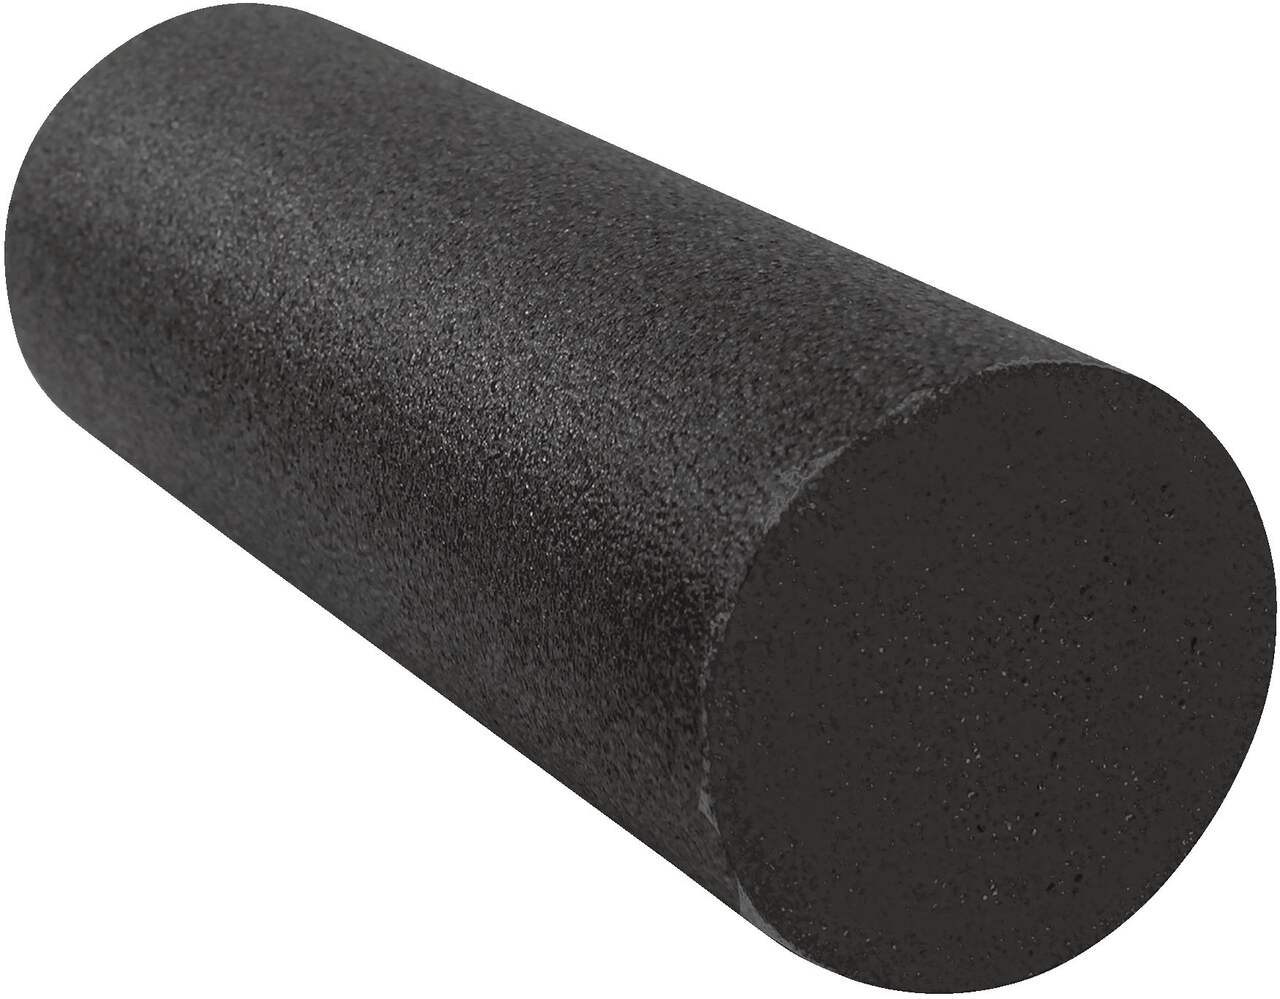 Foam Rollers, Resistance Bands, Core/Yoga/Pilates Equipment & More